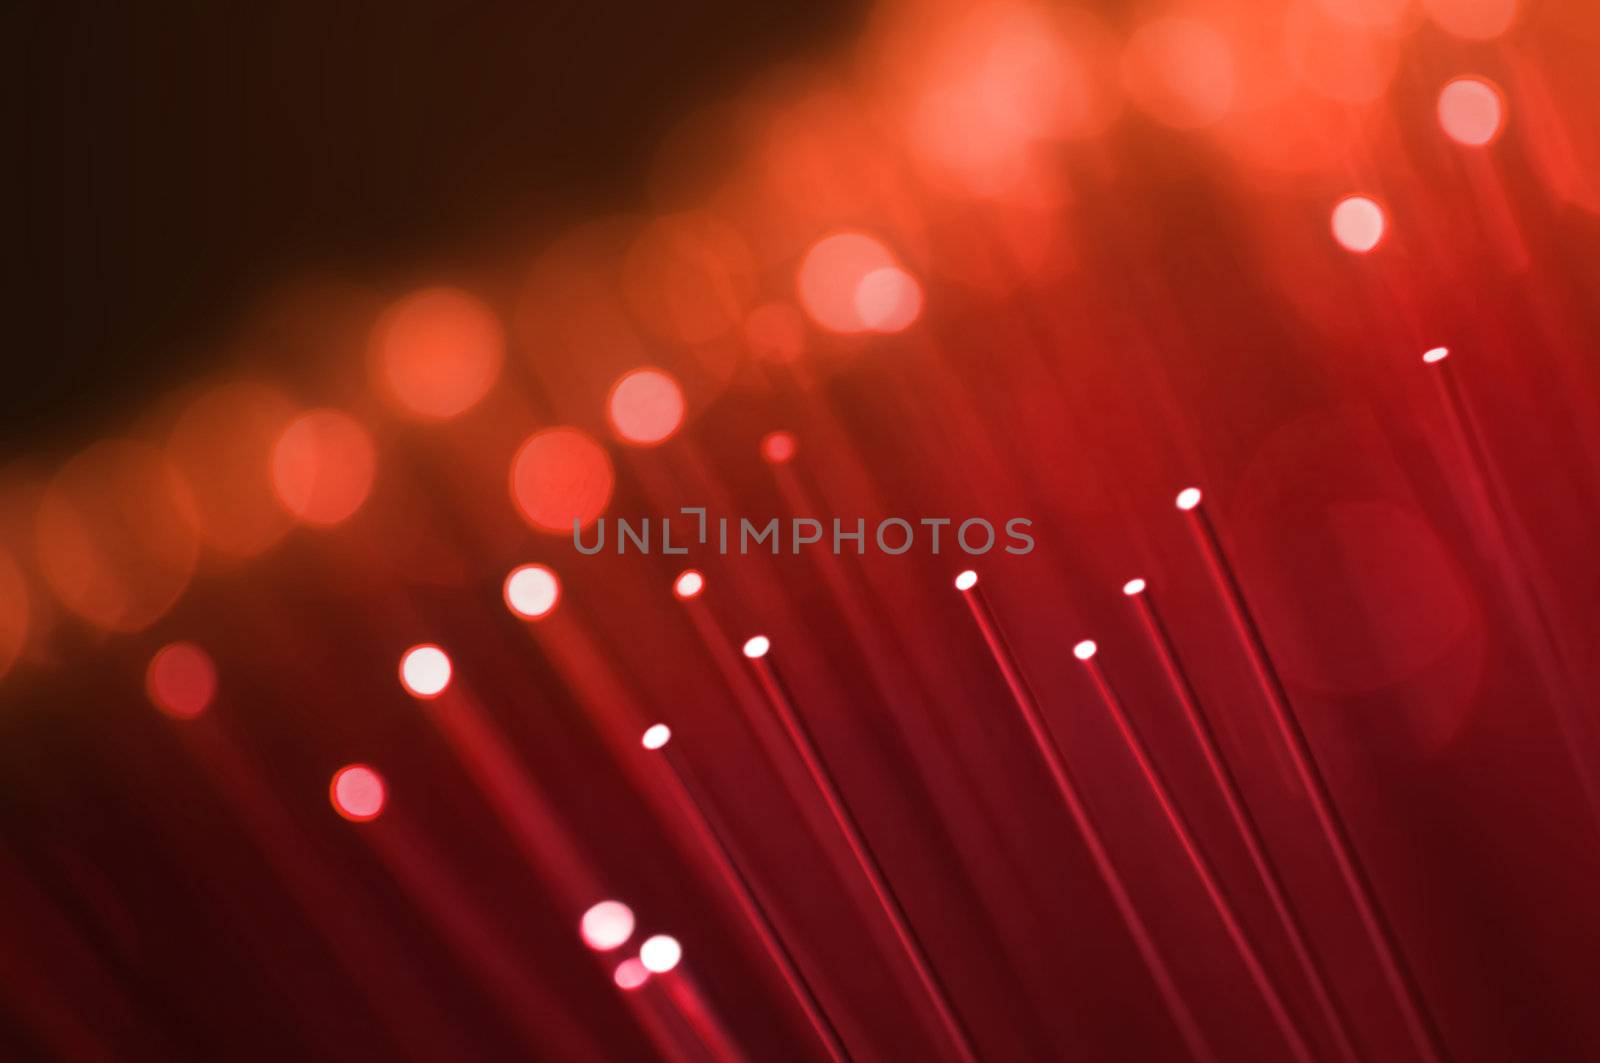 Close up on the ends of many illuminated red fiber optic strands with black background. Focus on foreground.